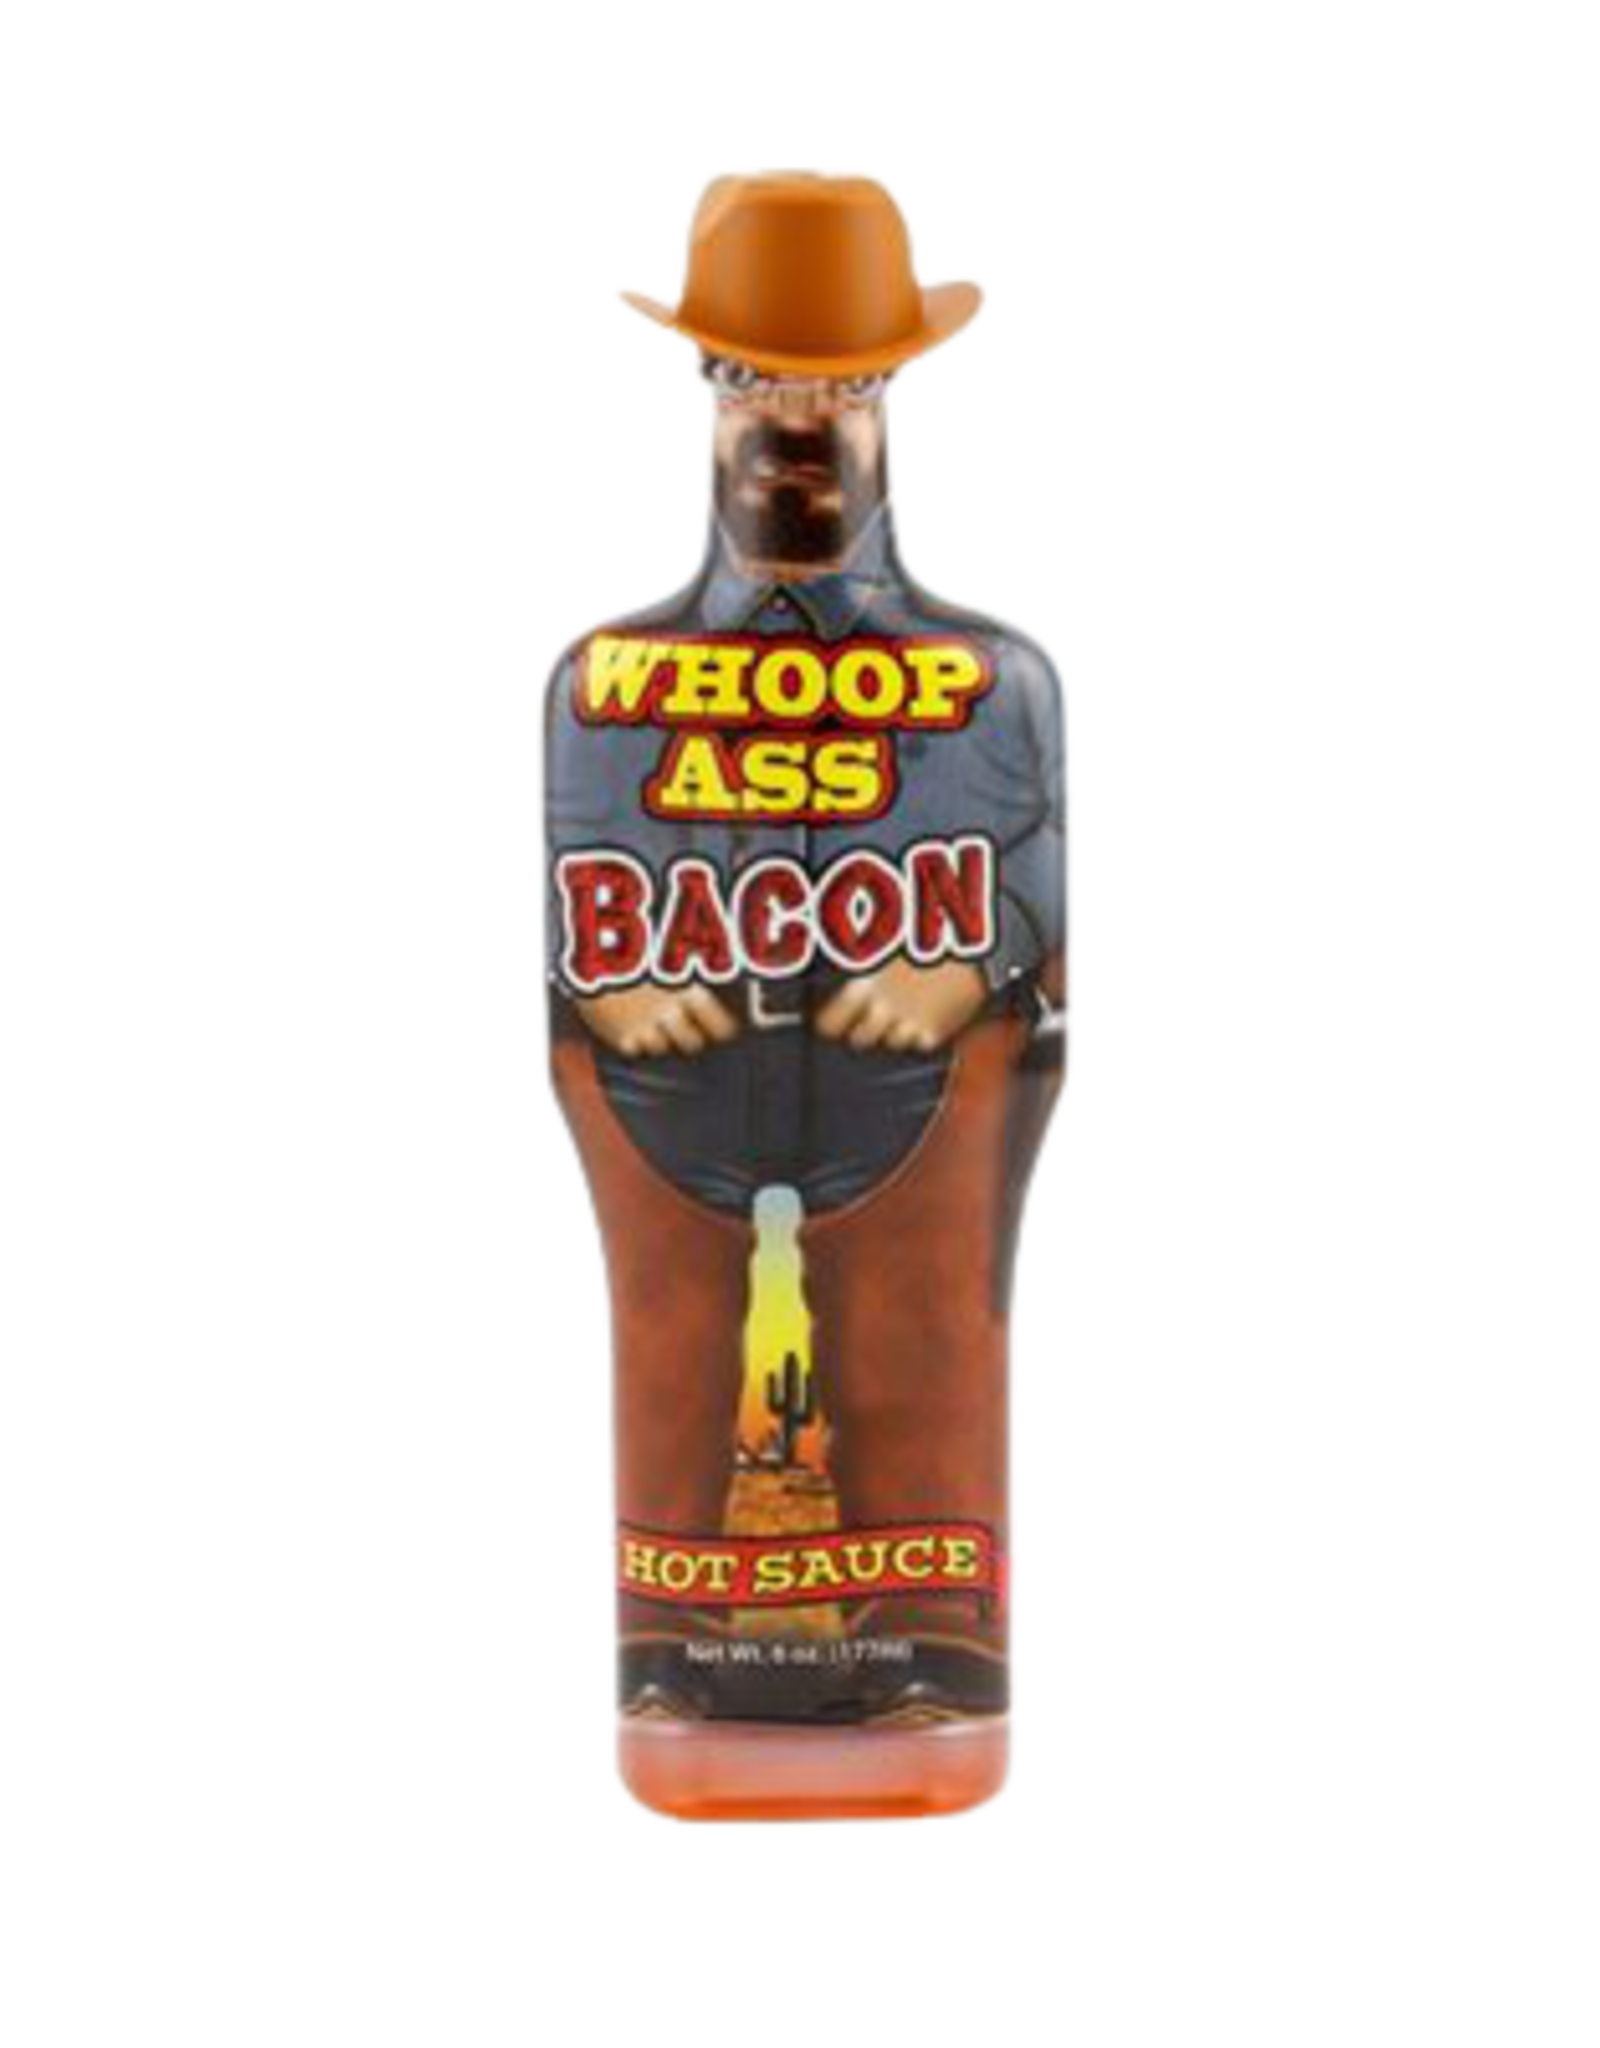 Bacon - Whoop Ass